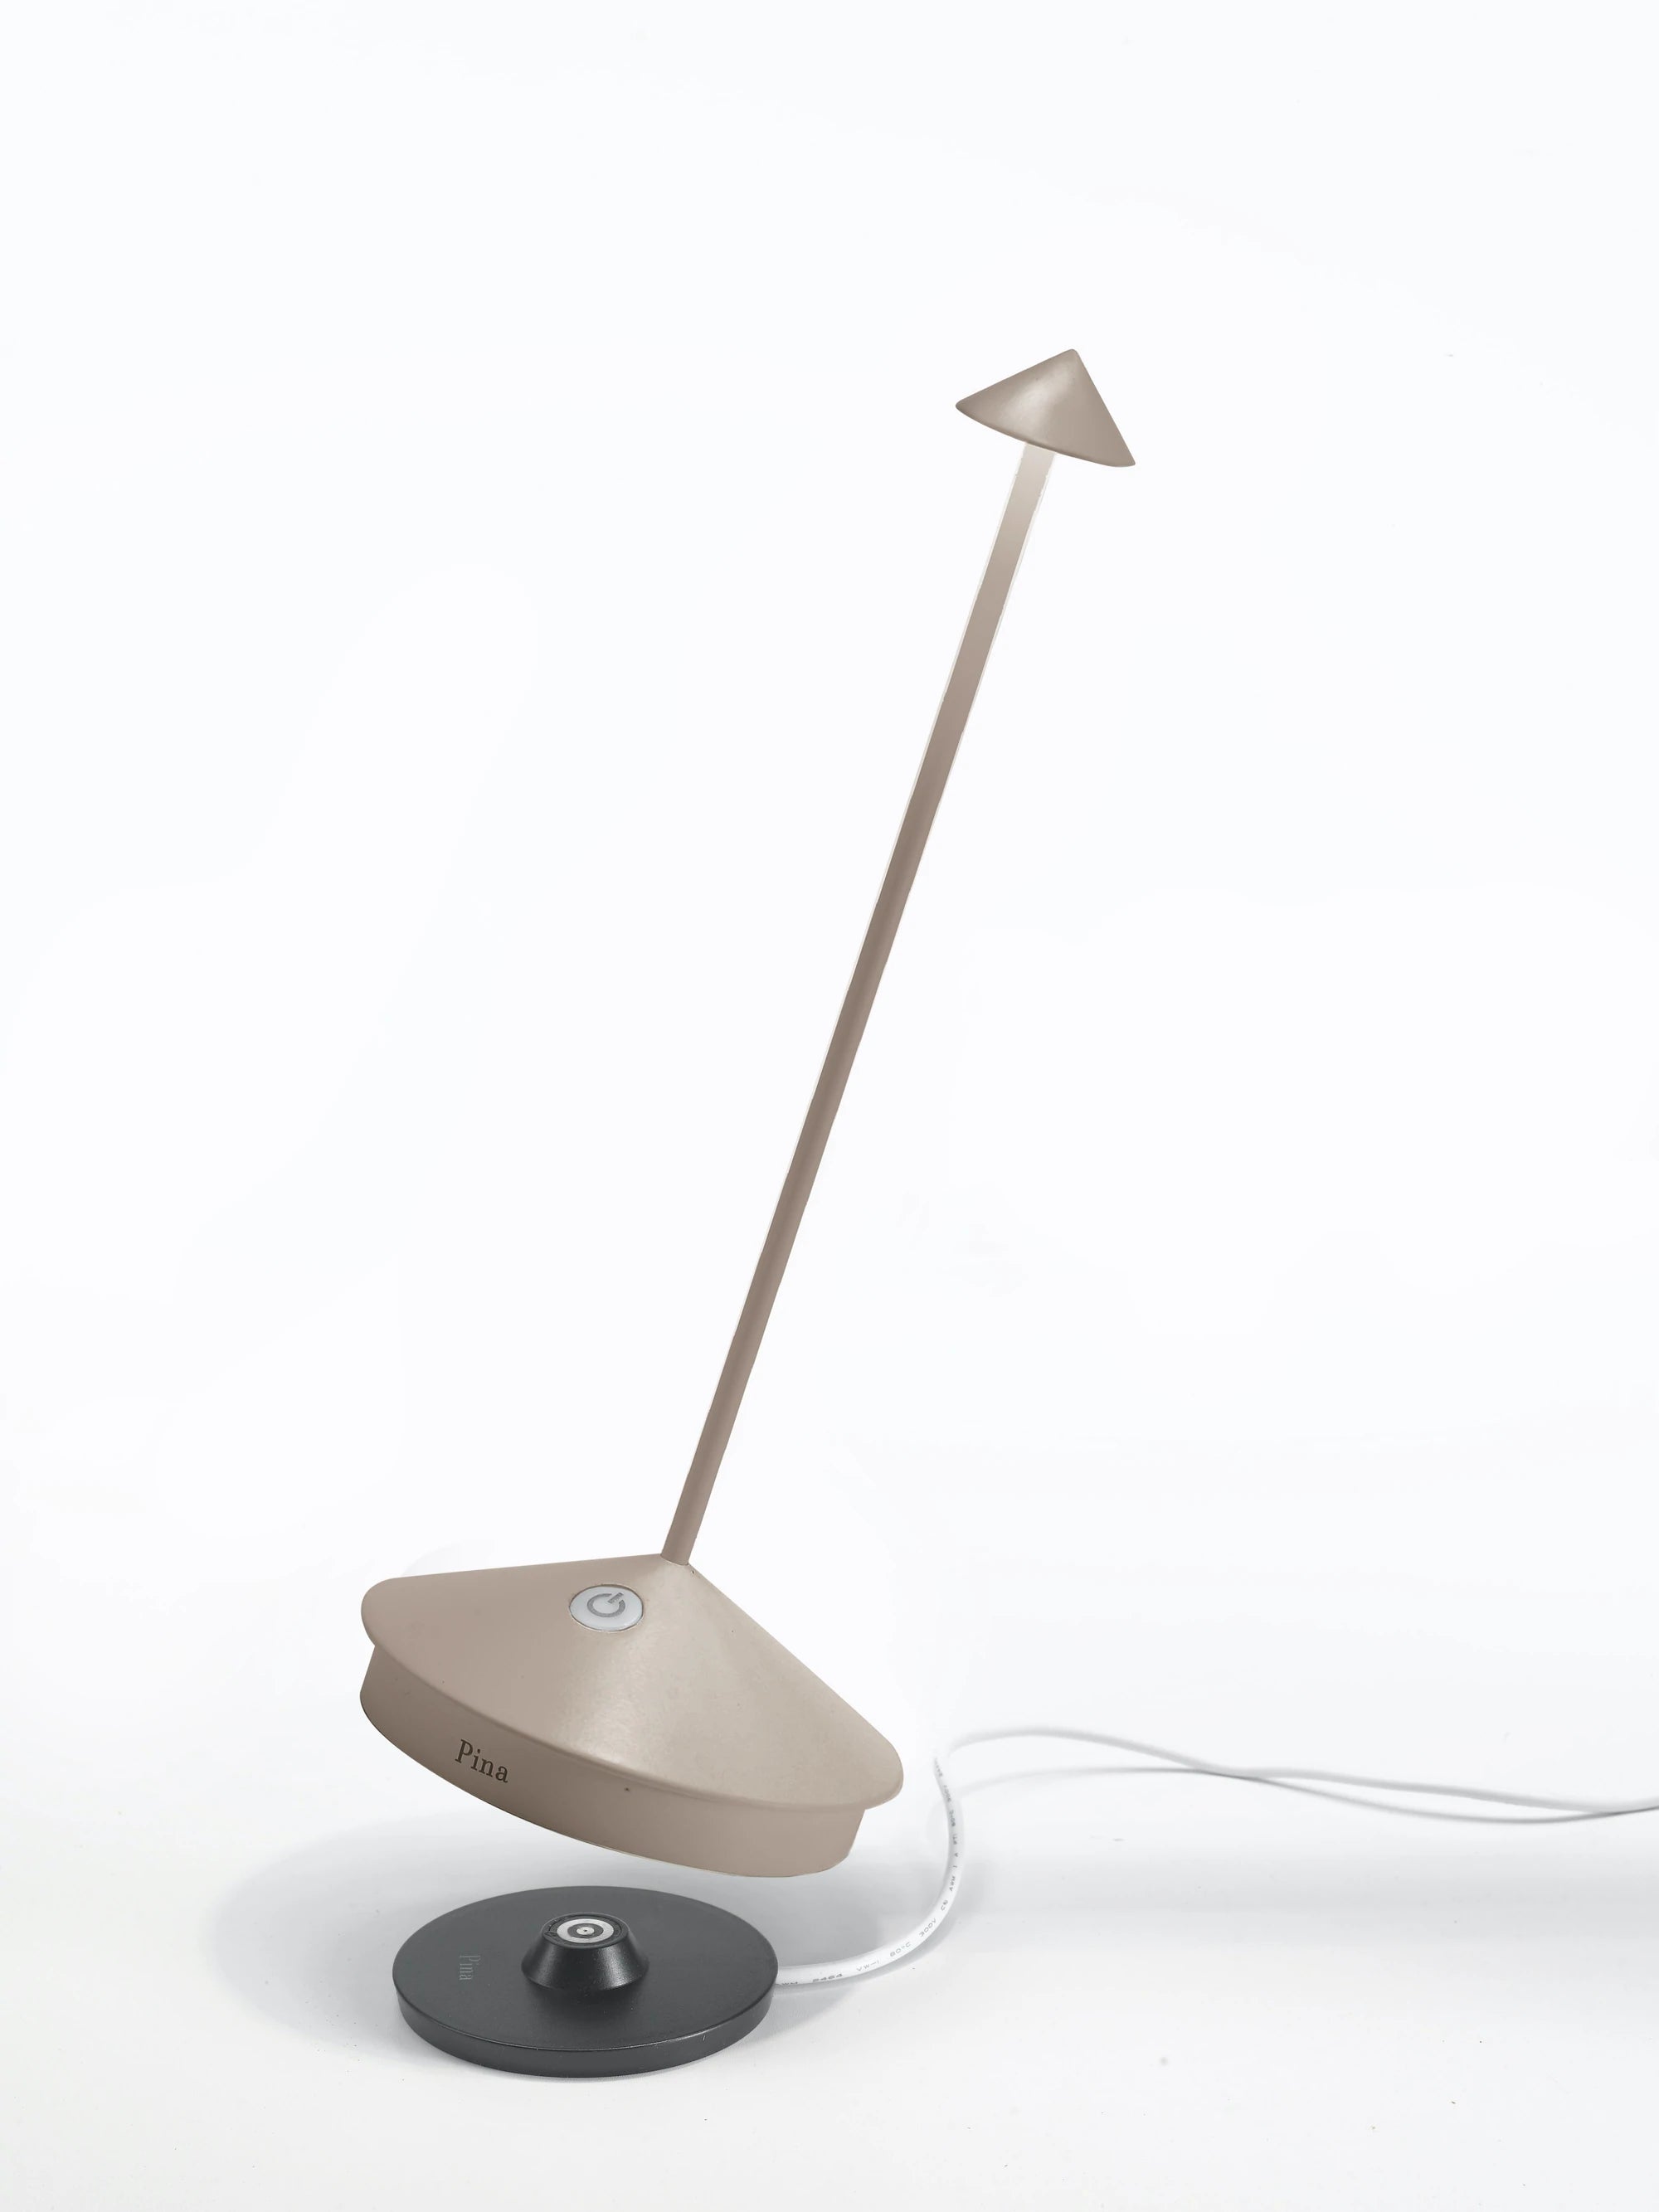 Pina Pro Table Lamps - Sand